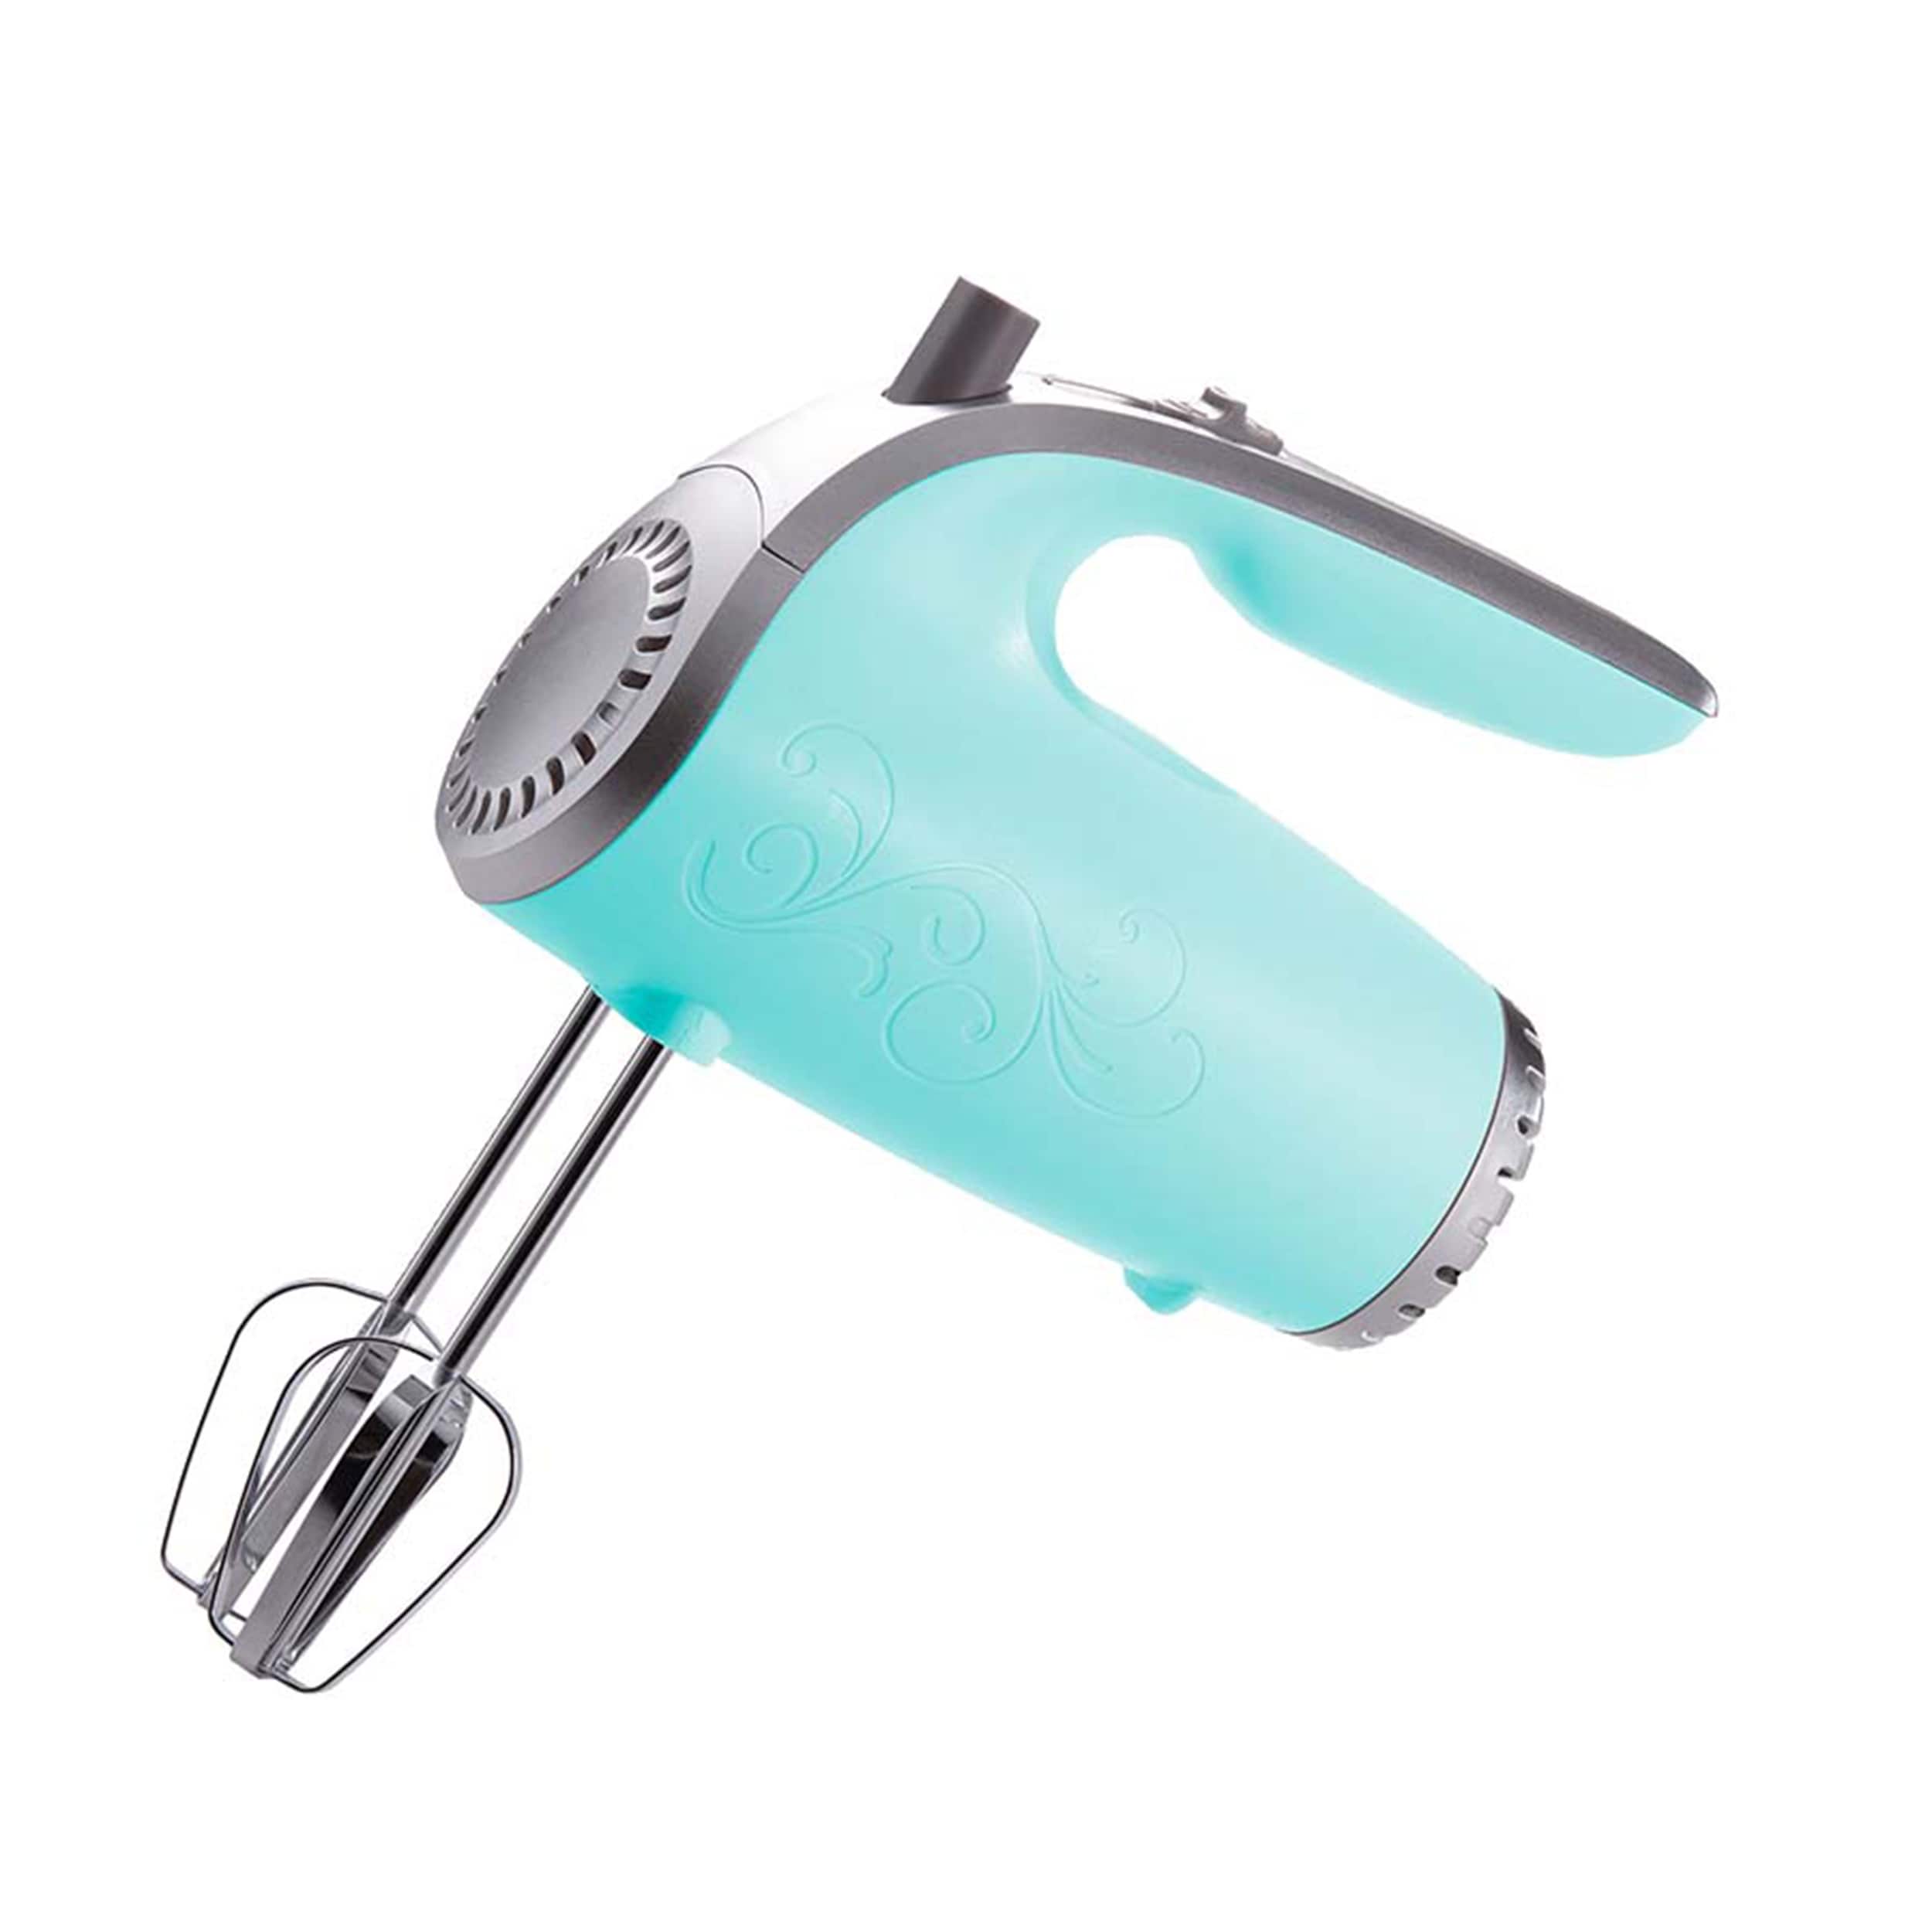 https://ak1.ostkcdn.com/images/products/is/images/direct/ae3e7085e4e5d68cc1d4a13b83c0d21bc4569c05/5-Speed-150-Watt-Electric-Hand-Mixer-in-Turquoise.jpg